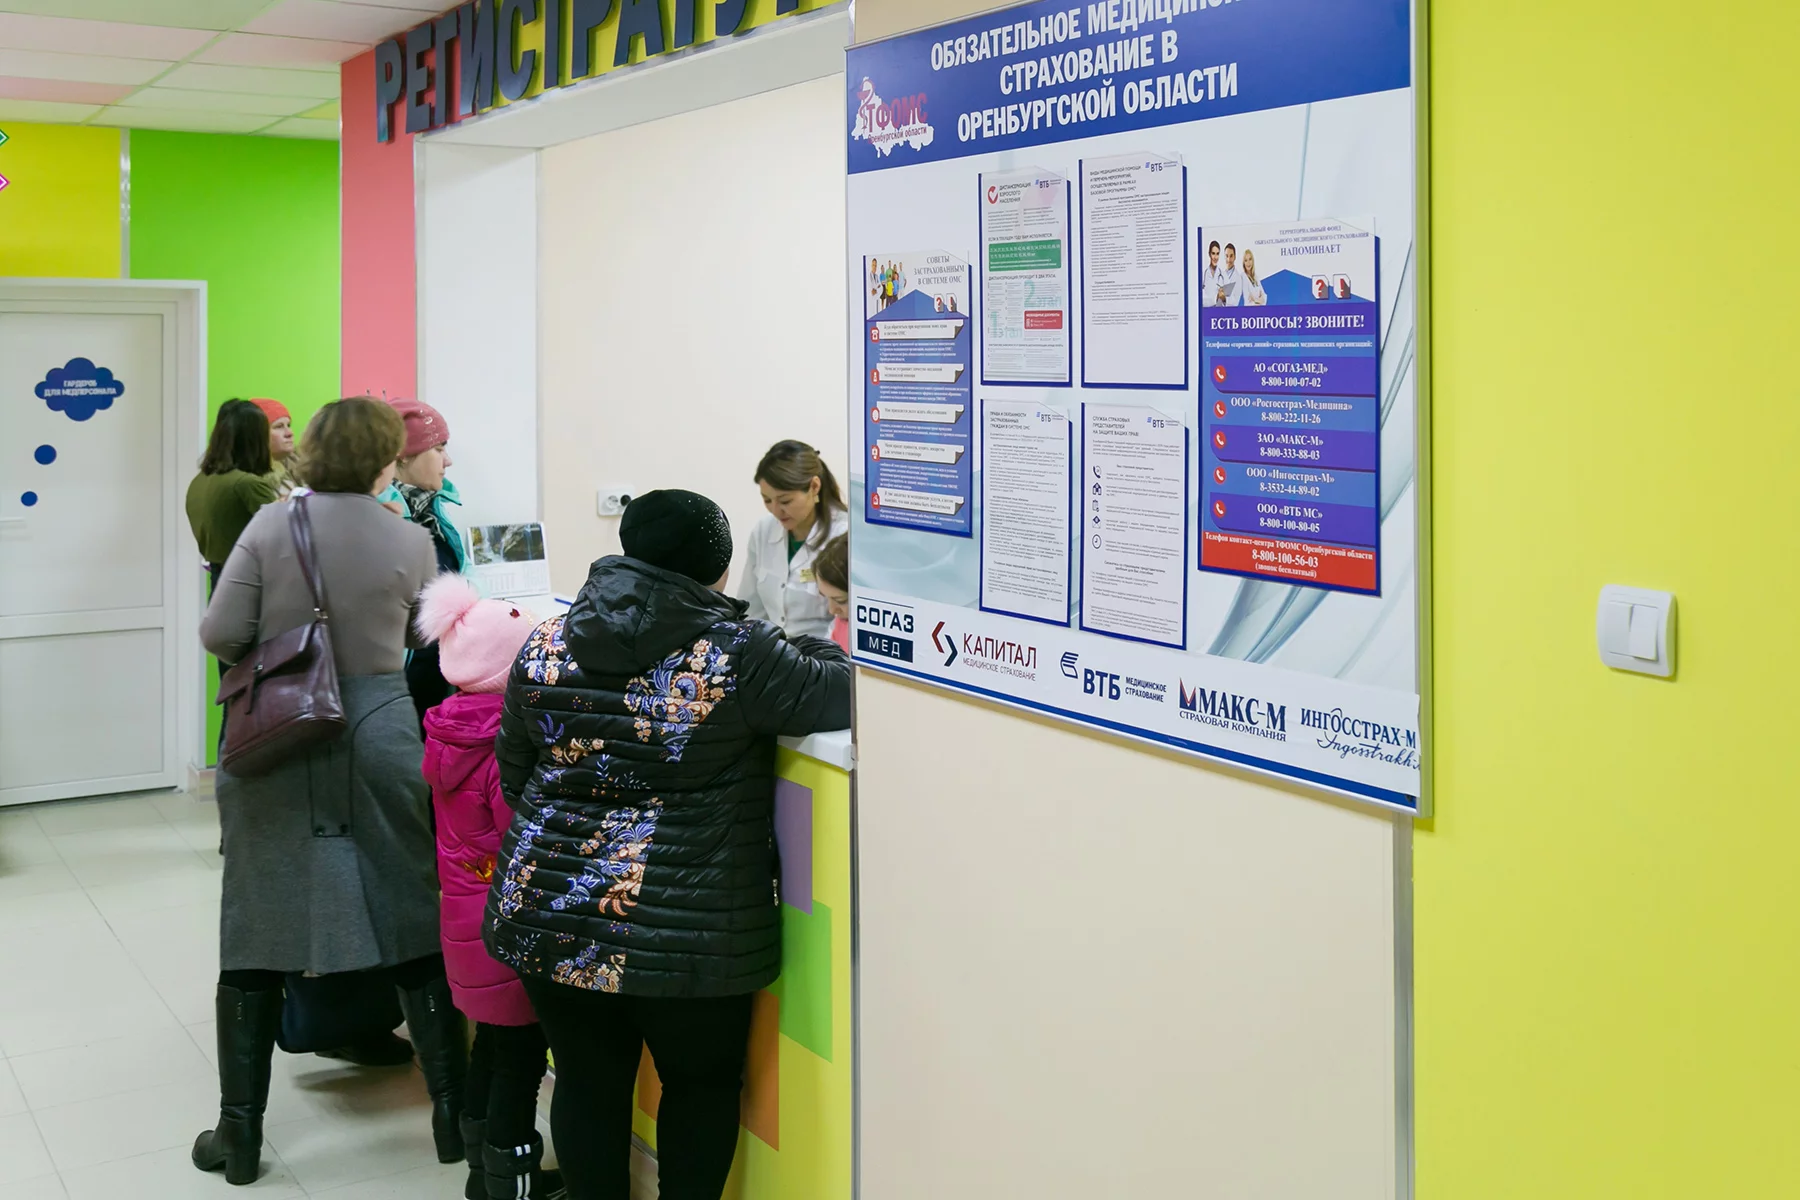 Reception desk at a children's clinic in Yasny, Russia